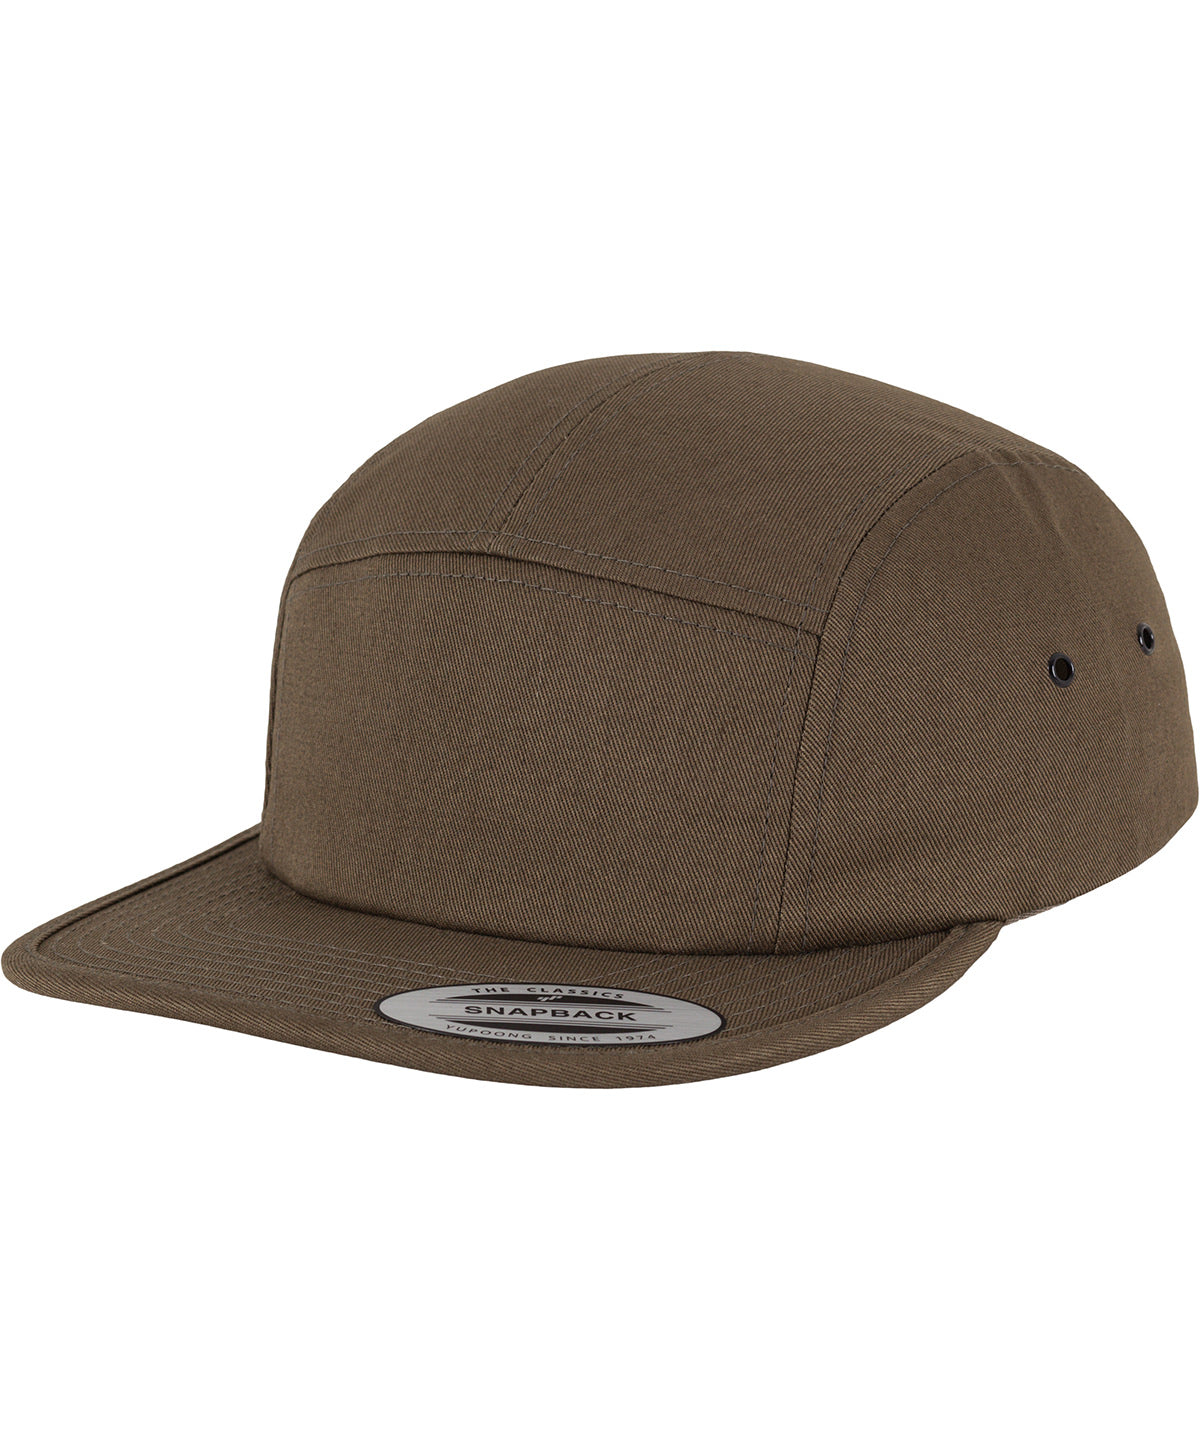 Olive - Classic 5-panel jockey cap (7005) Caps Flexfit by Yupoong Headwear, Must Haves, New Colours for 2023, Rebrandable Schoolwear Centres